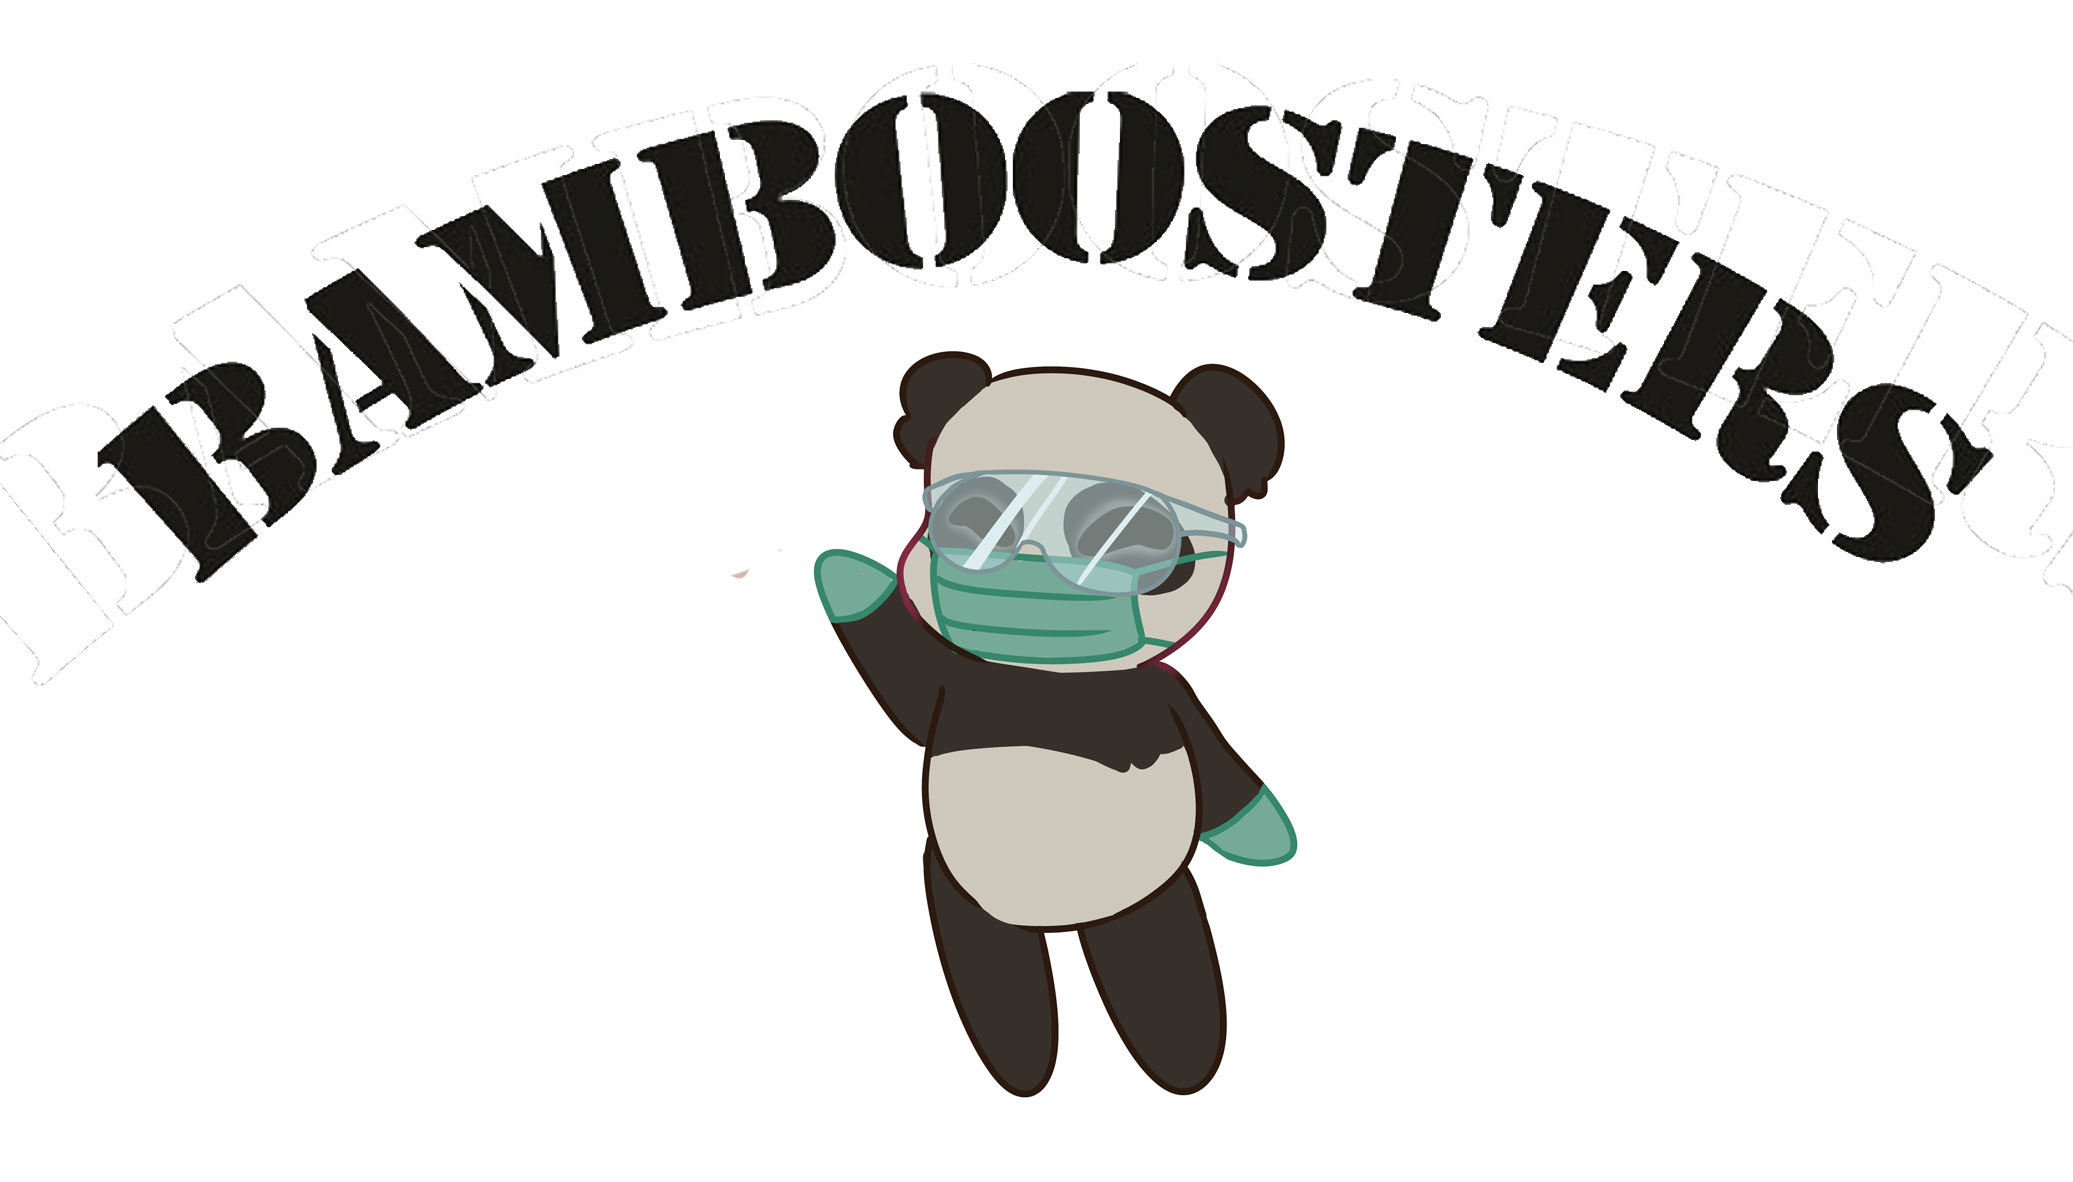 Bamboosters